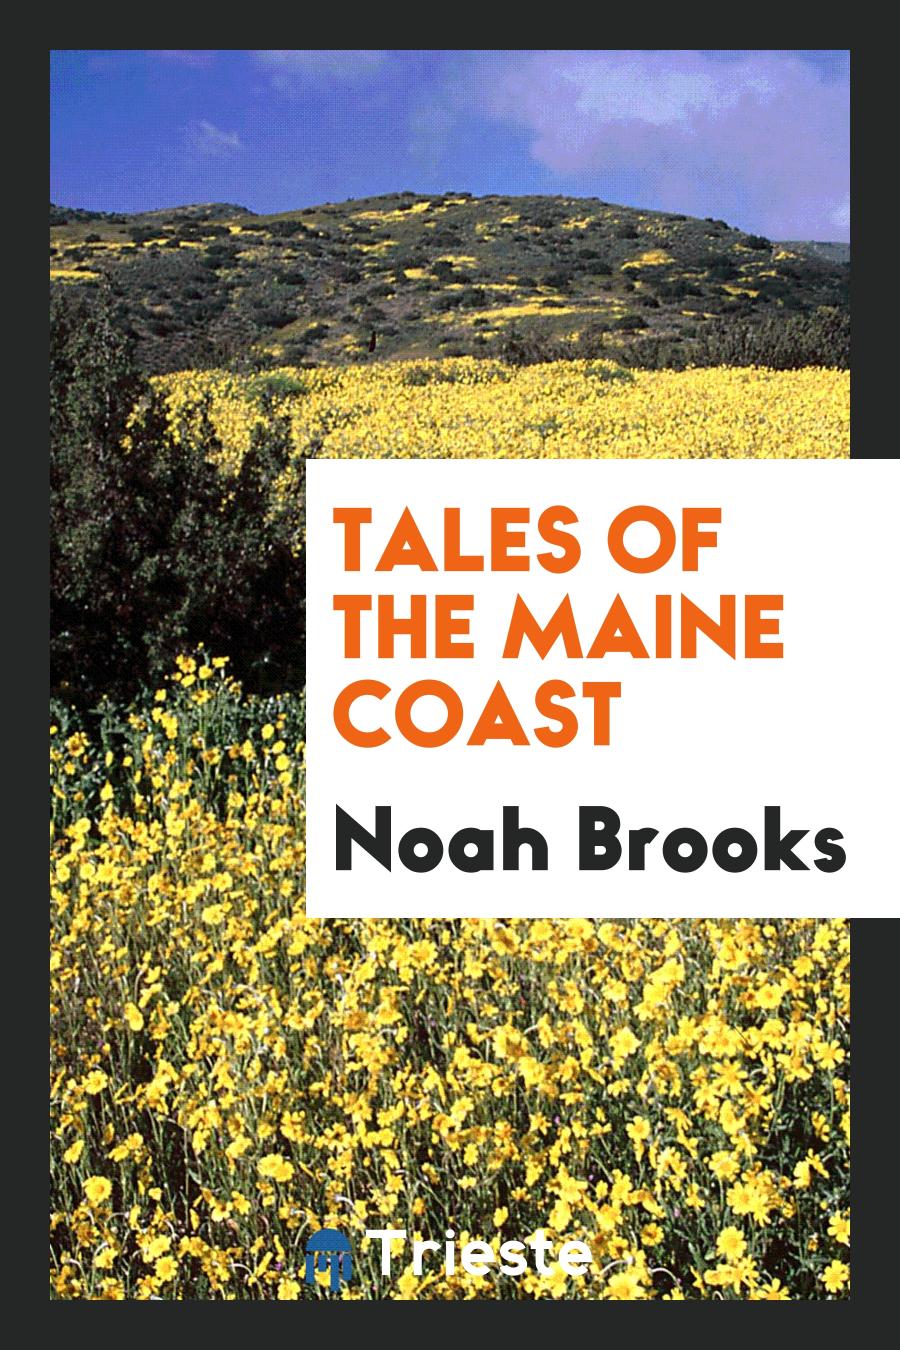 Tales of the Maine coast